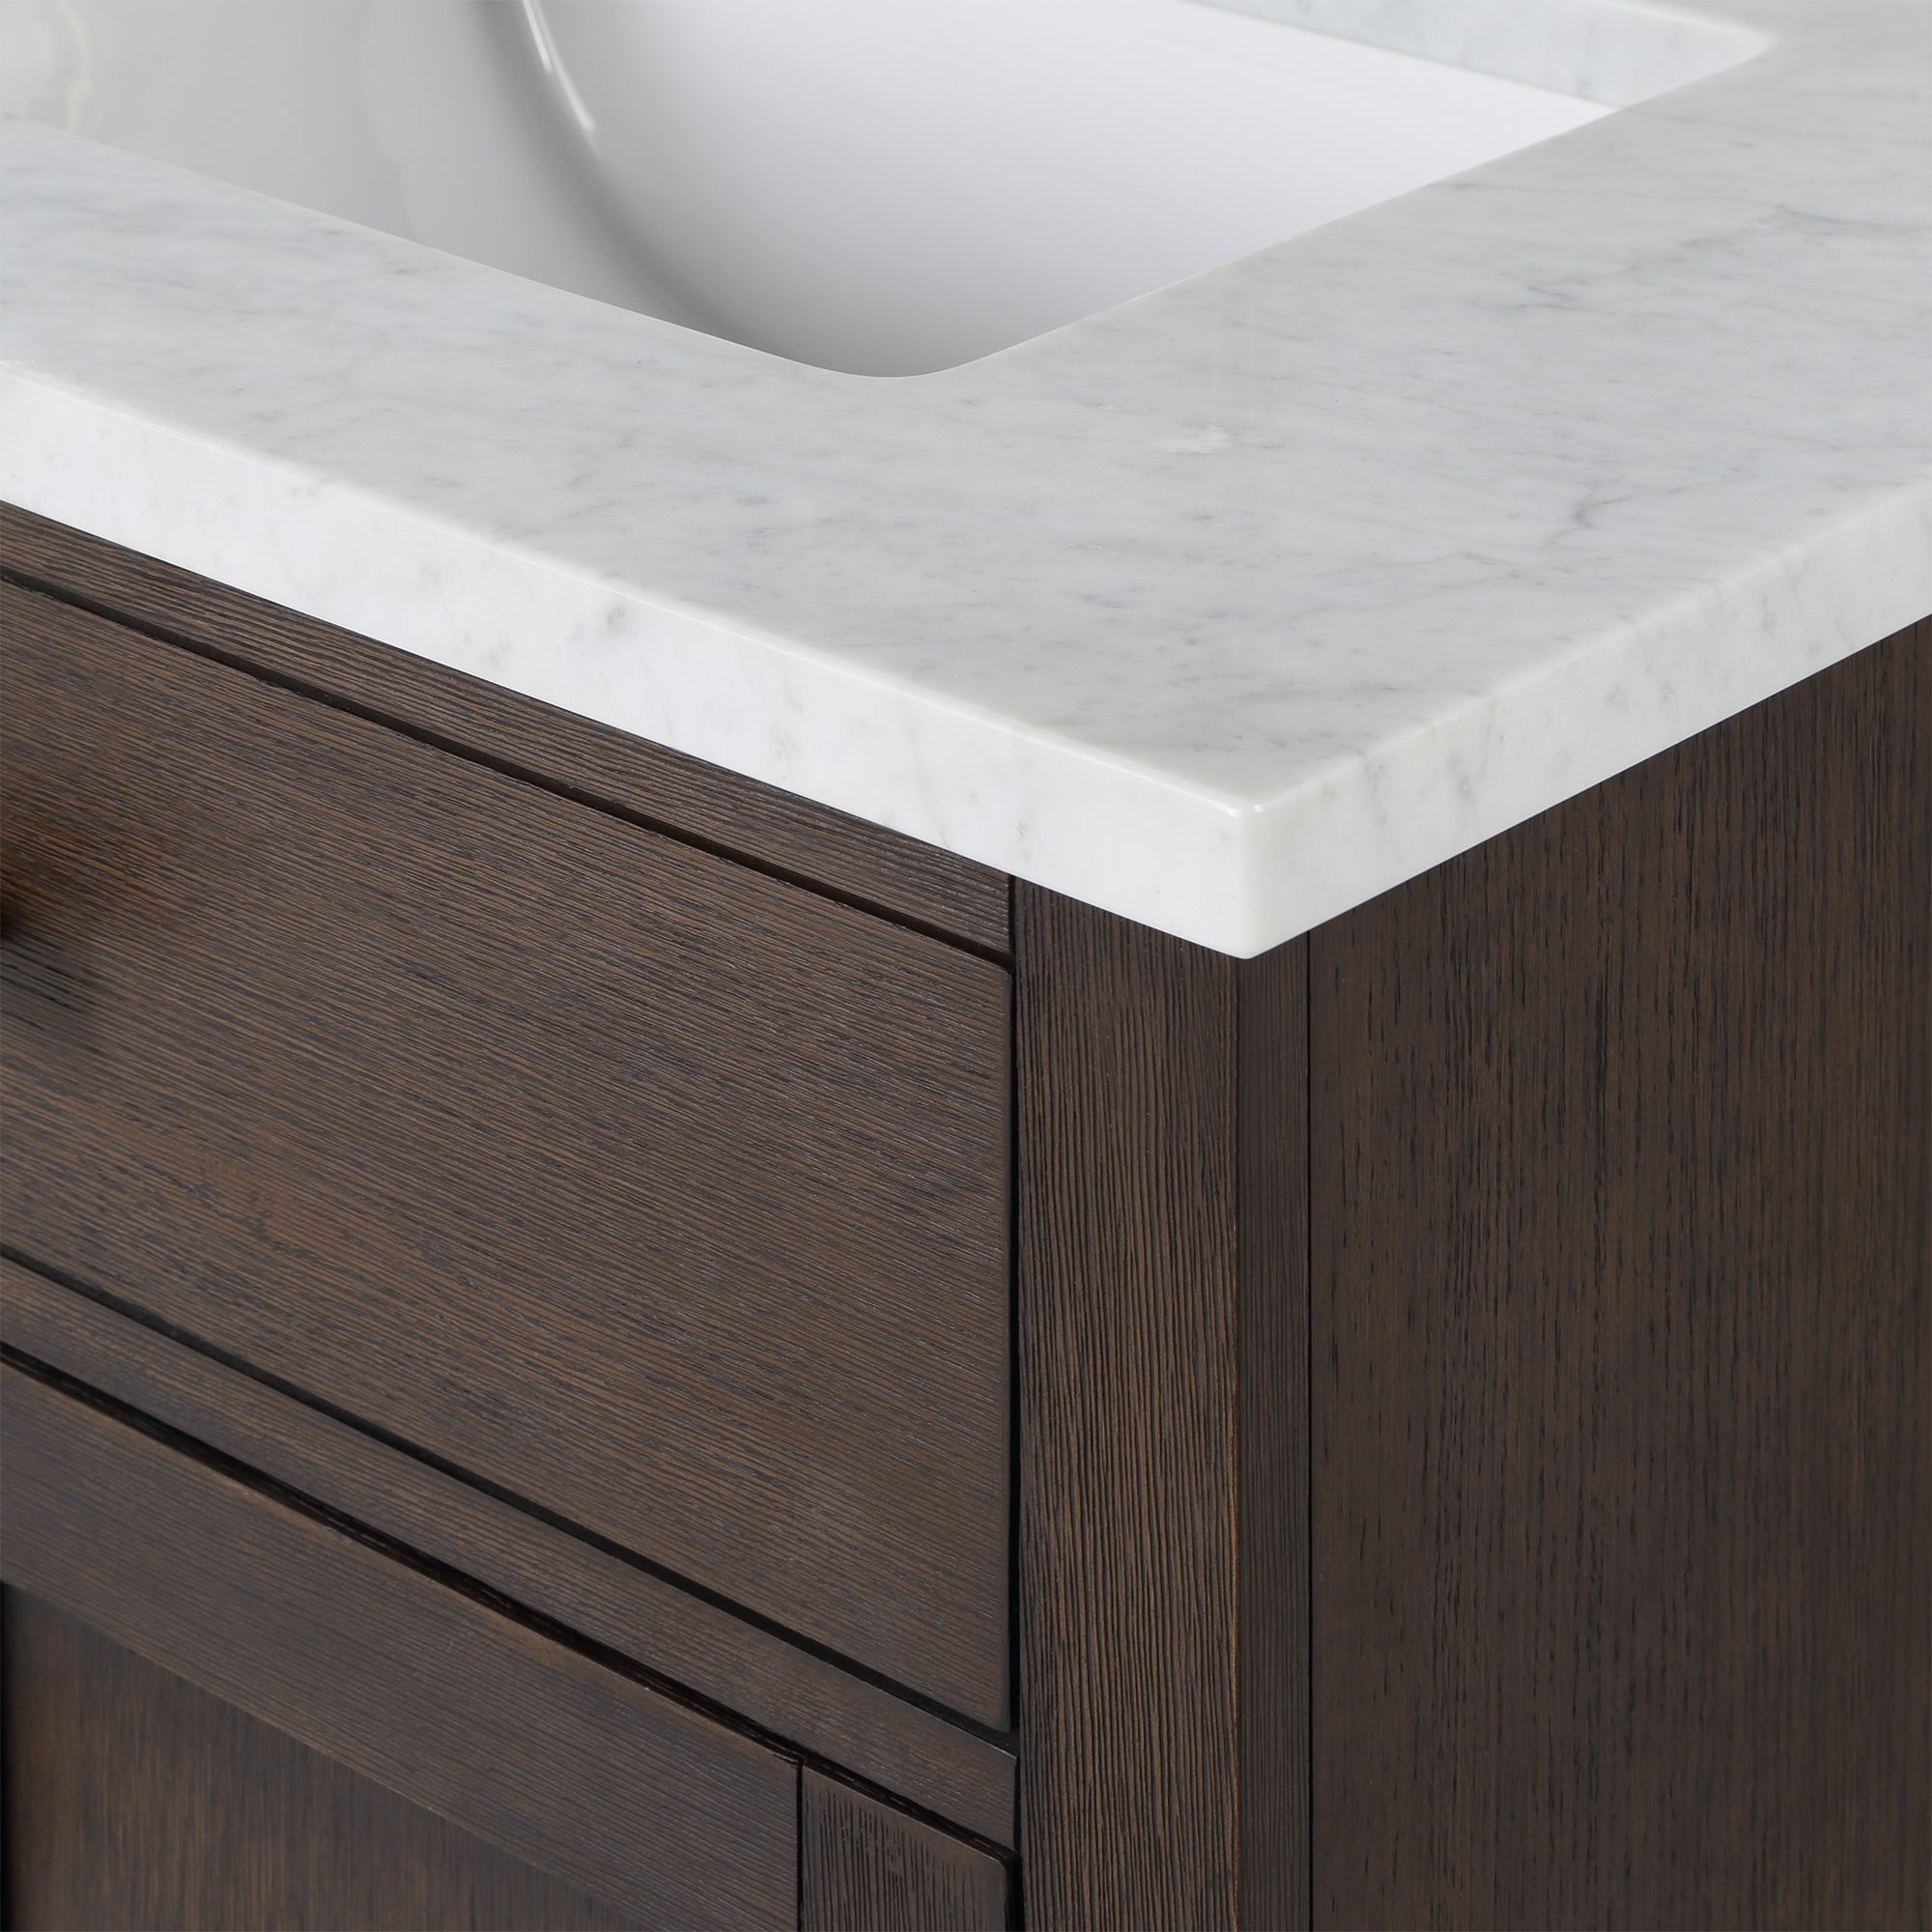 Water Creation | Chestnut 72 In. Double Sink Carrara White Marble Countertop Vanity In Brown Oak with Grooseneck Faucets and Mirrors | CH72CW06BK-R21BL1406